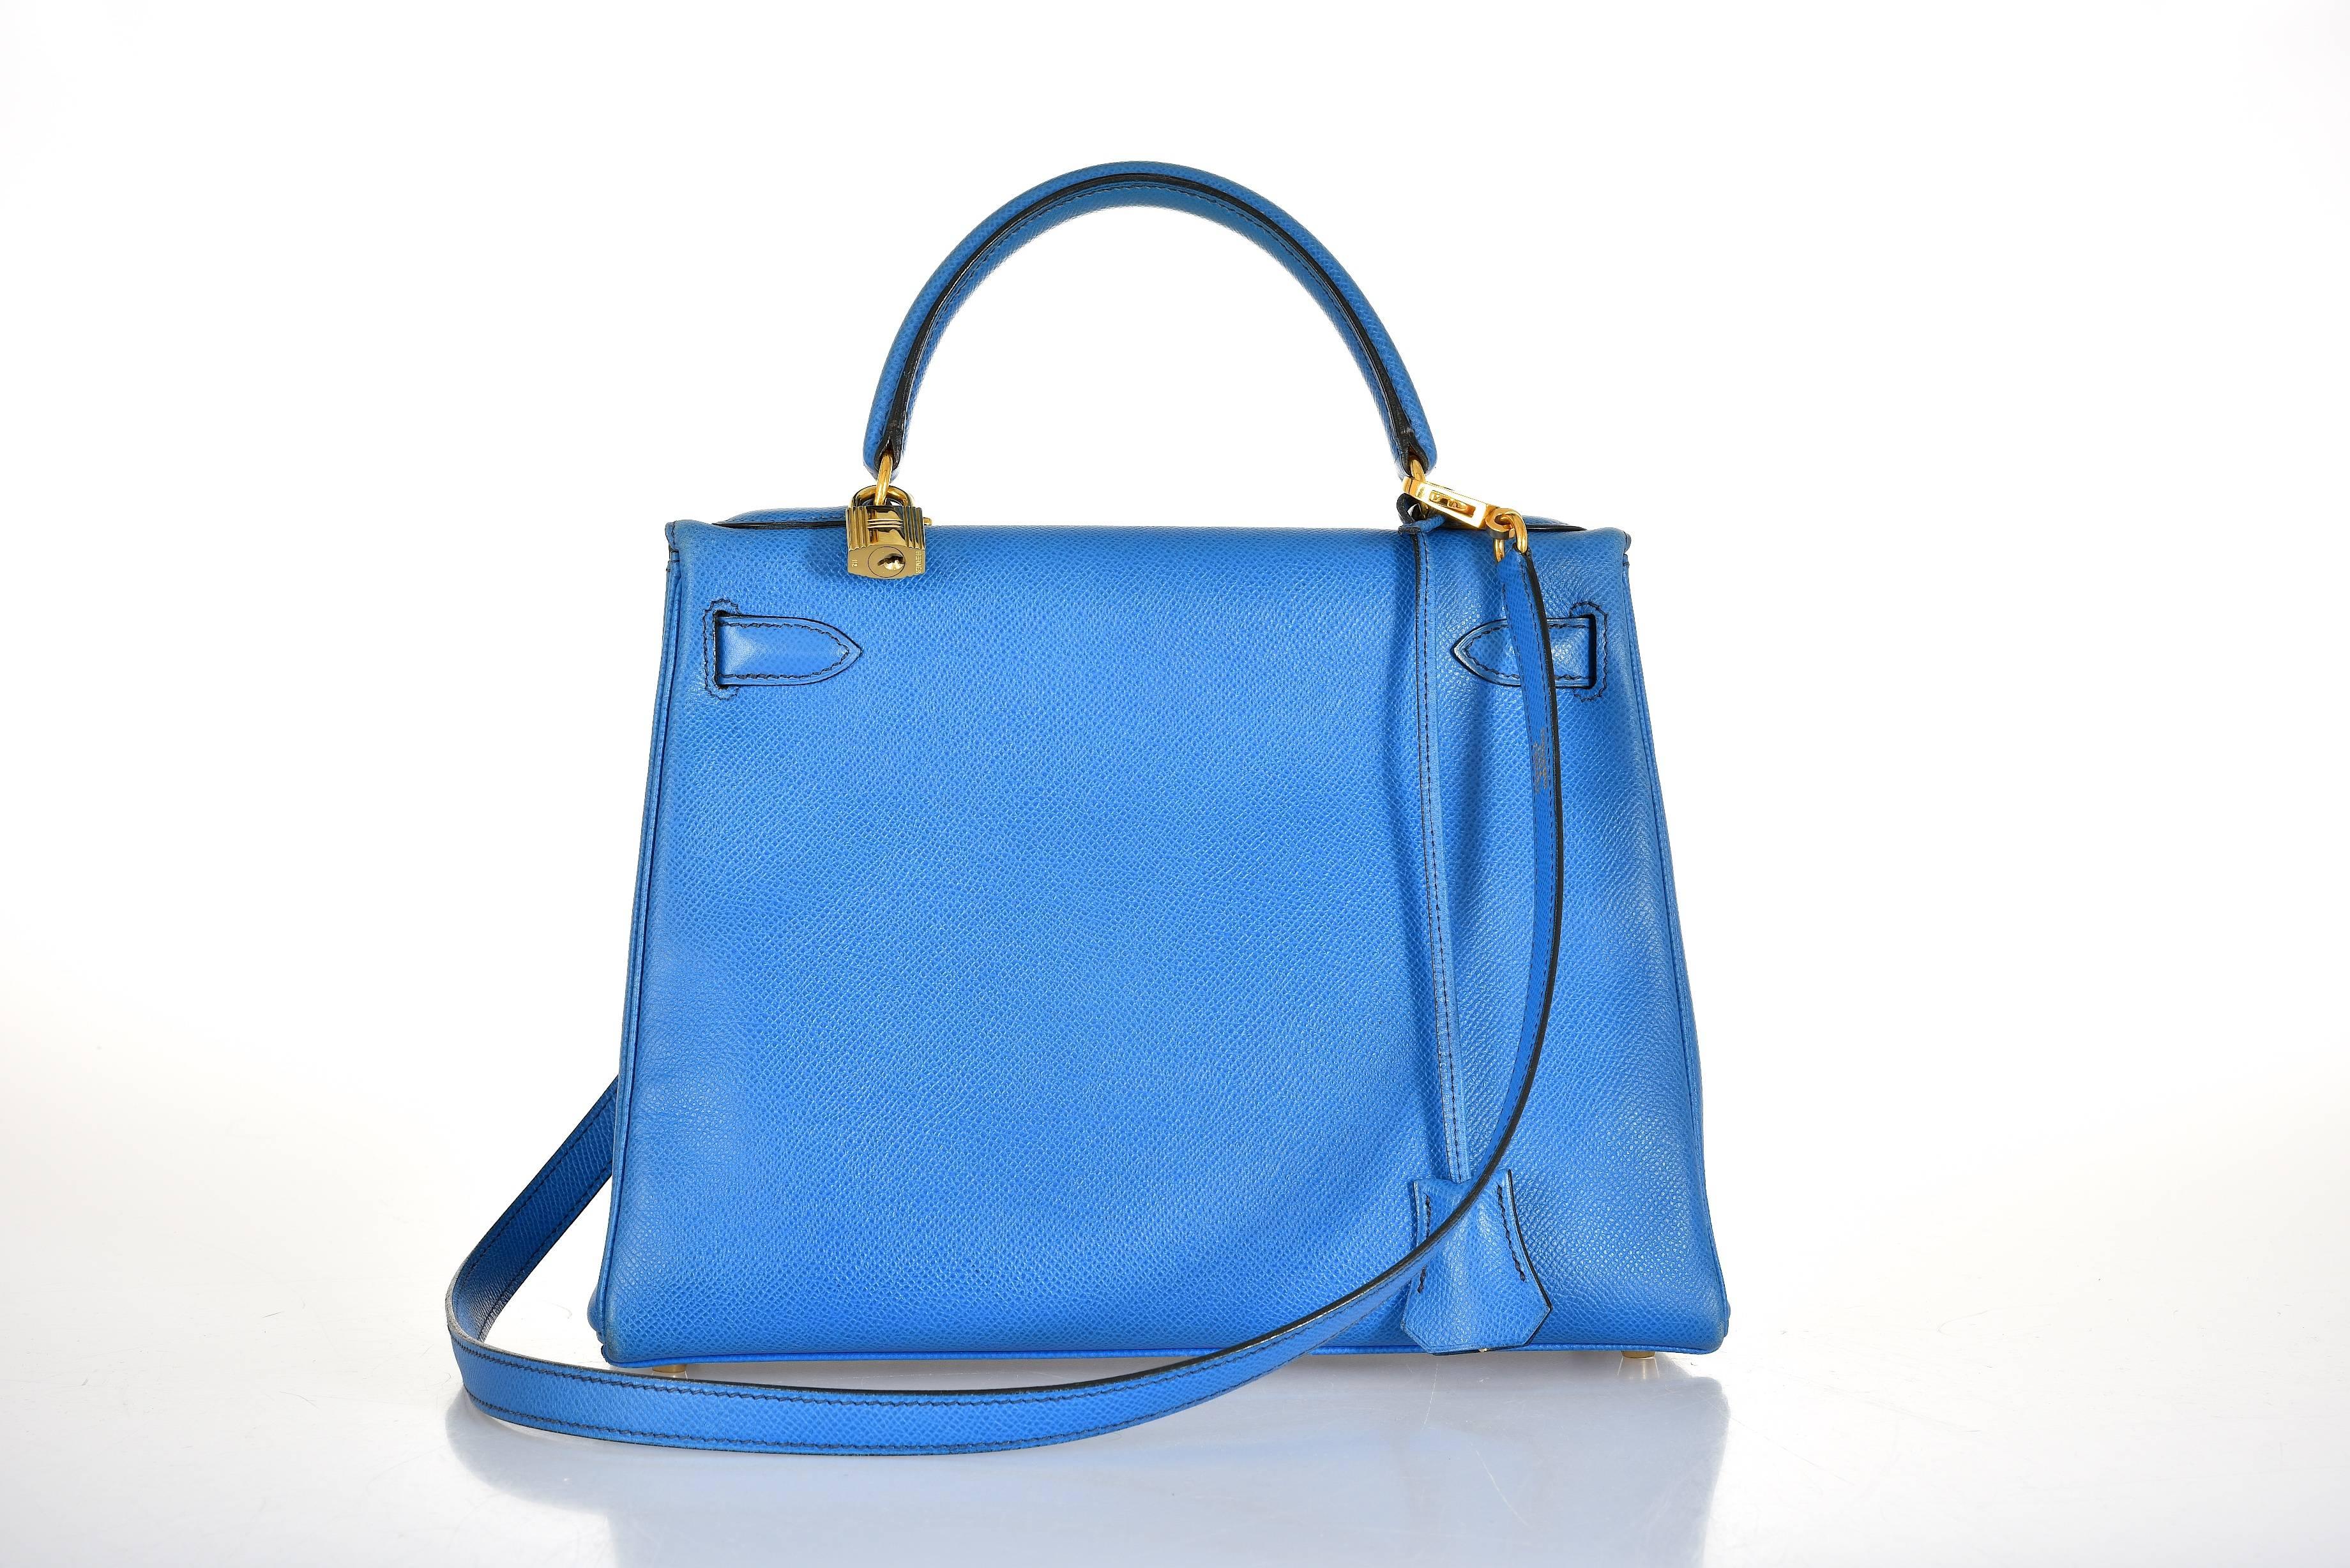 HERMES Kelly Bag 28cm Blue France Courchevel leather with Gold hardware

Love this bag!

Excellent

Hermes Kelly Bag is in excellent condition. The exterior leather is Courchevel and the lining leather is Chevre. The color is discontinued Blue